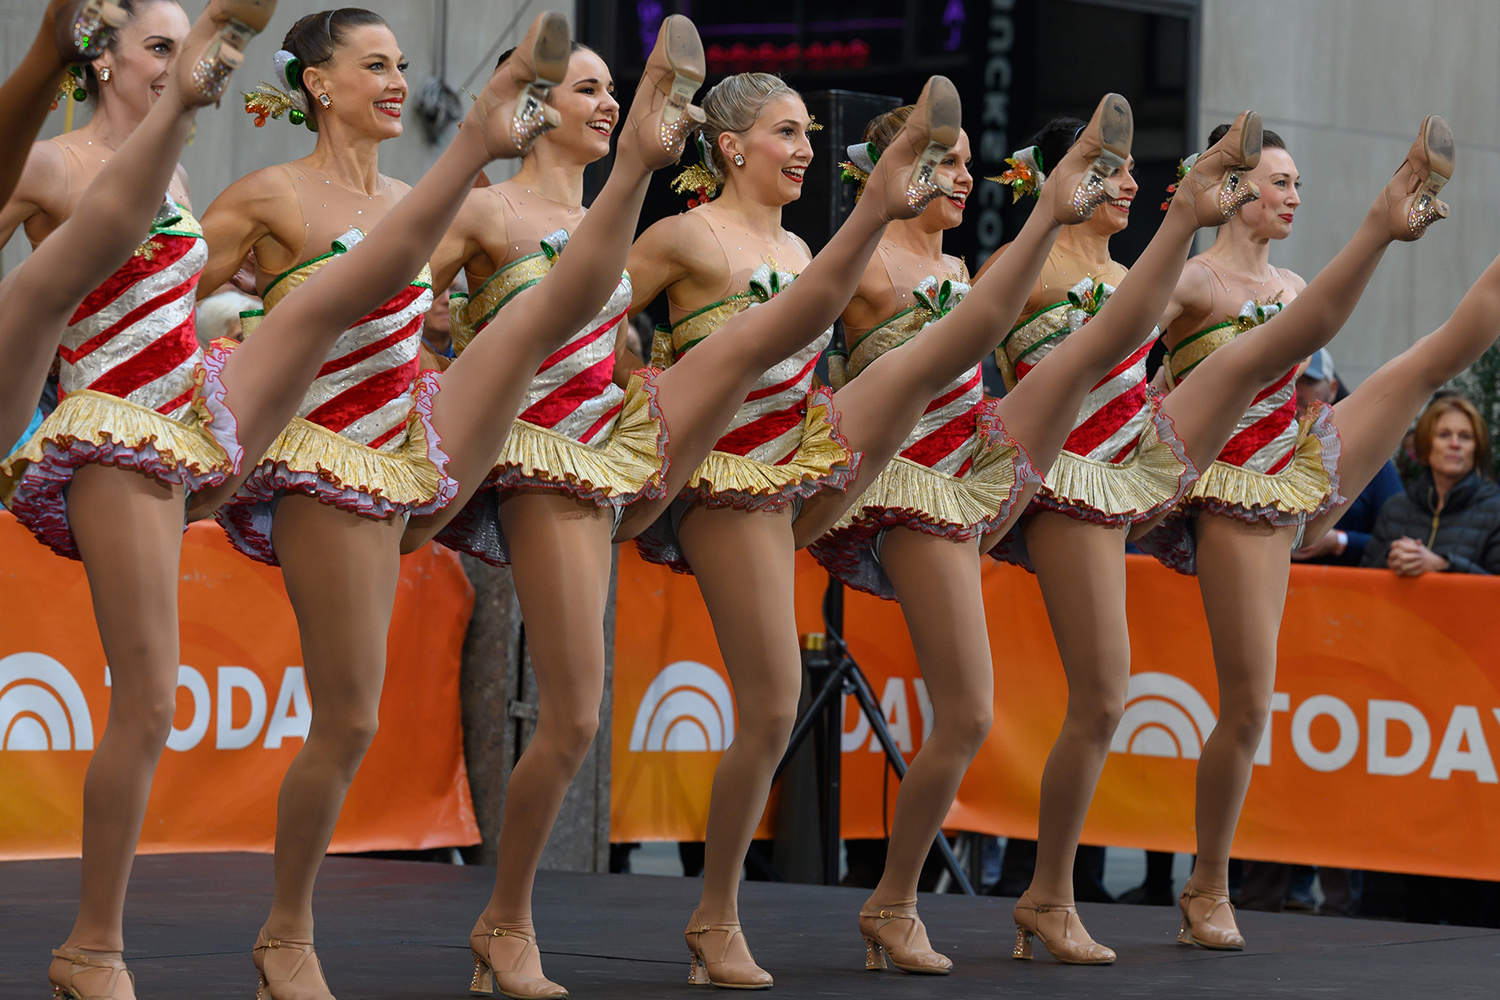 how much money does the rockettes make